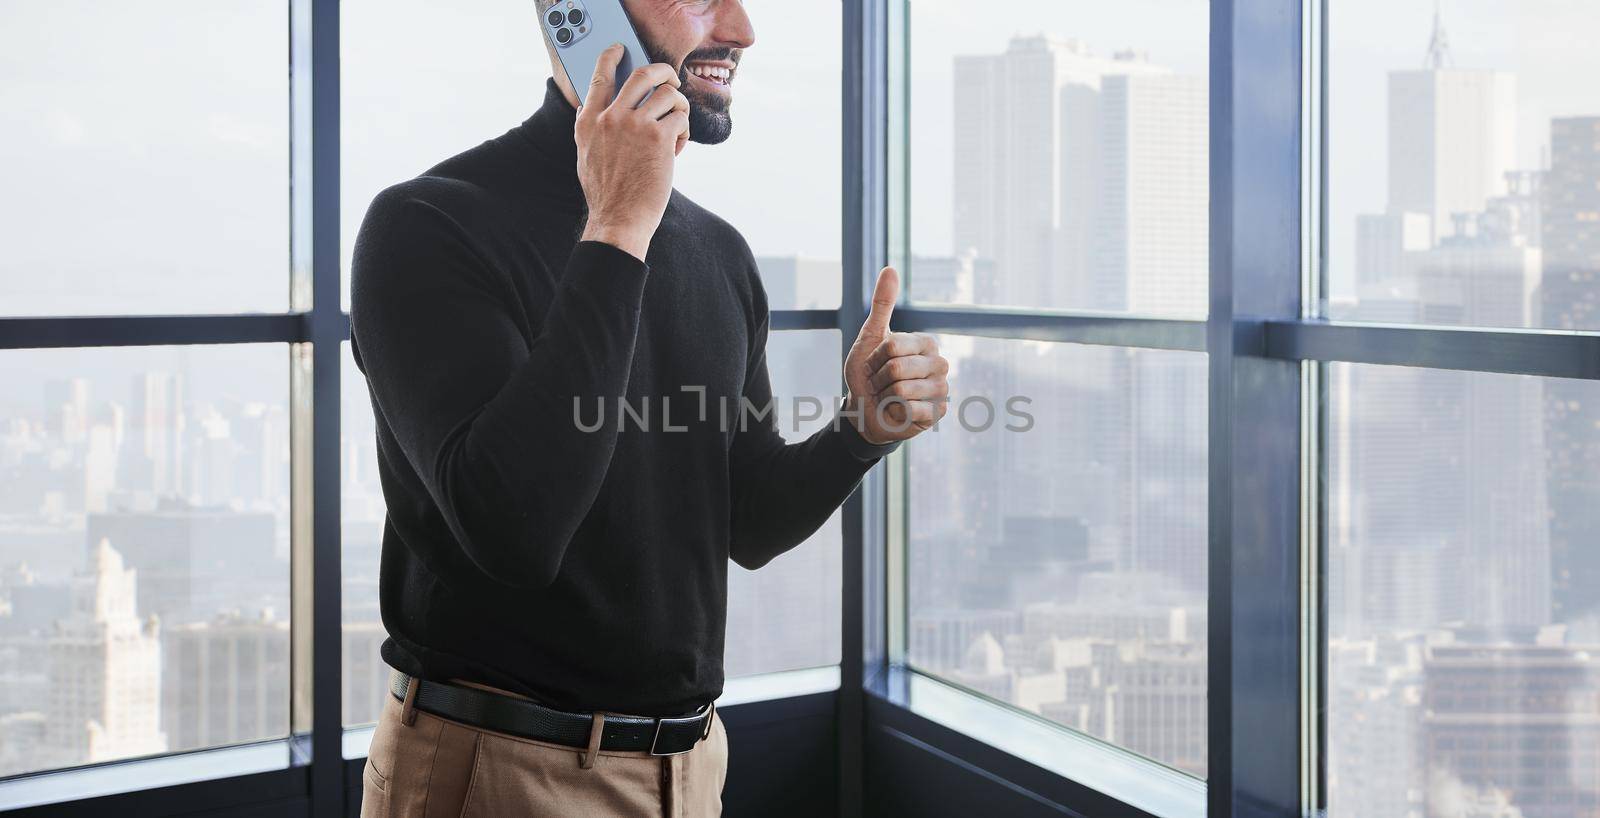 businessman gives a thumbs up. A person uses mobile technologies.